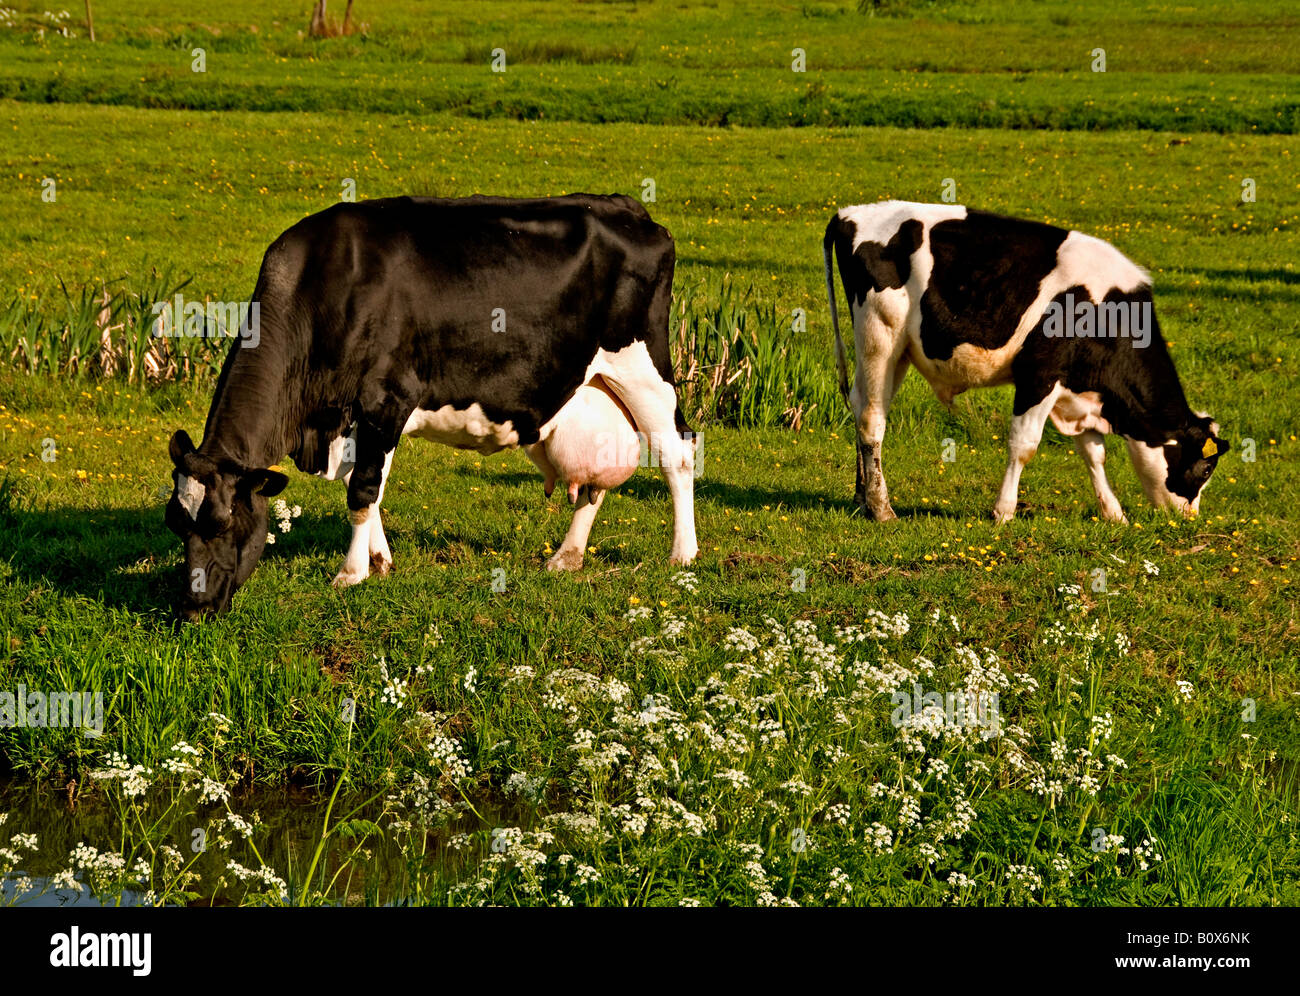 North South Holland Cow Netherlands dutch farming farmer agriculture Stock Photo